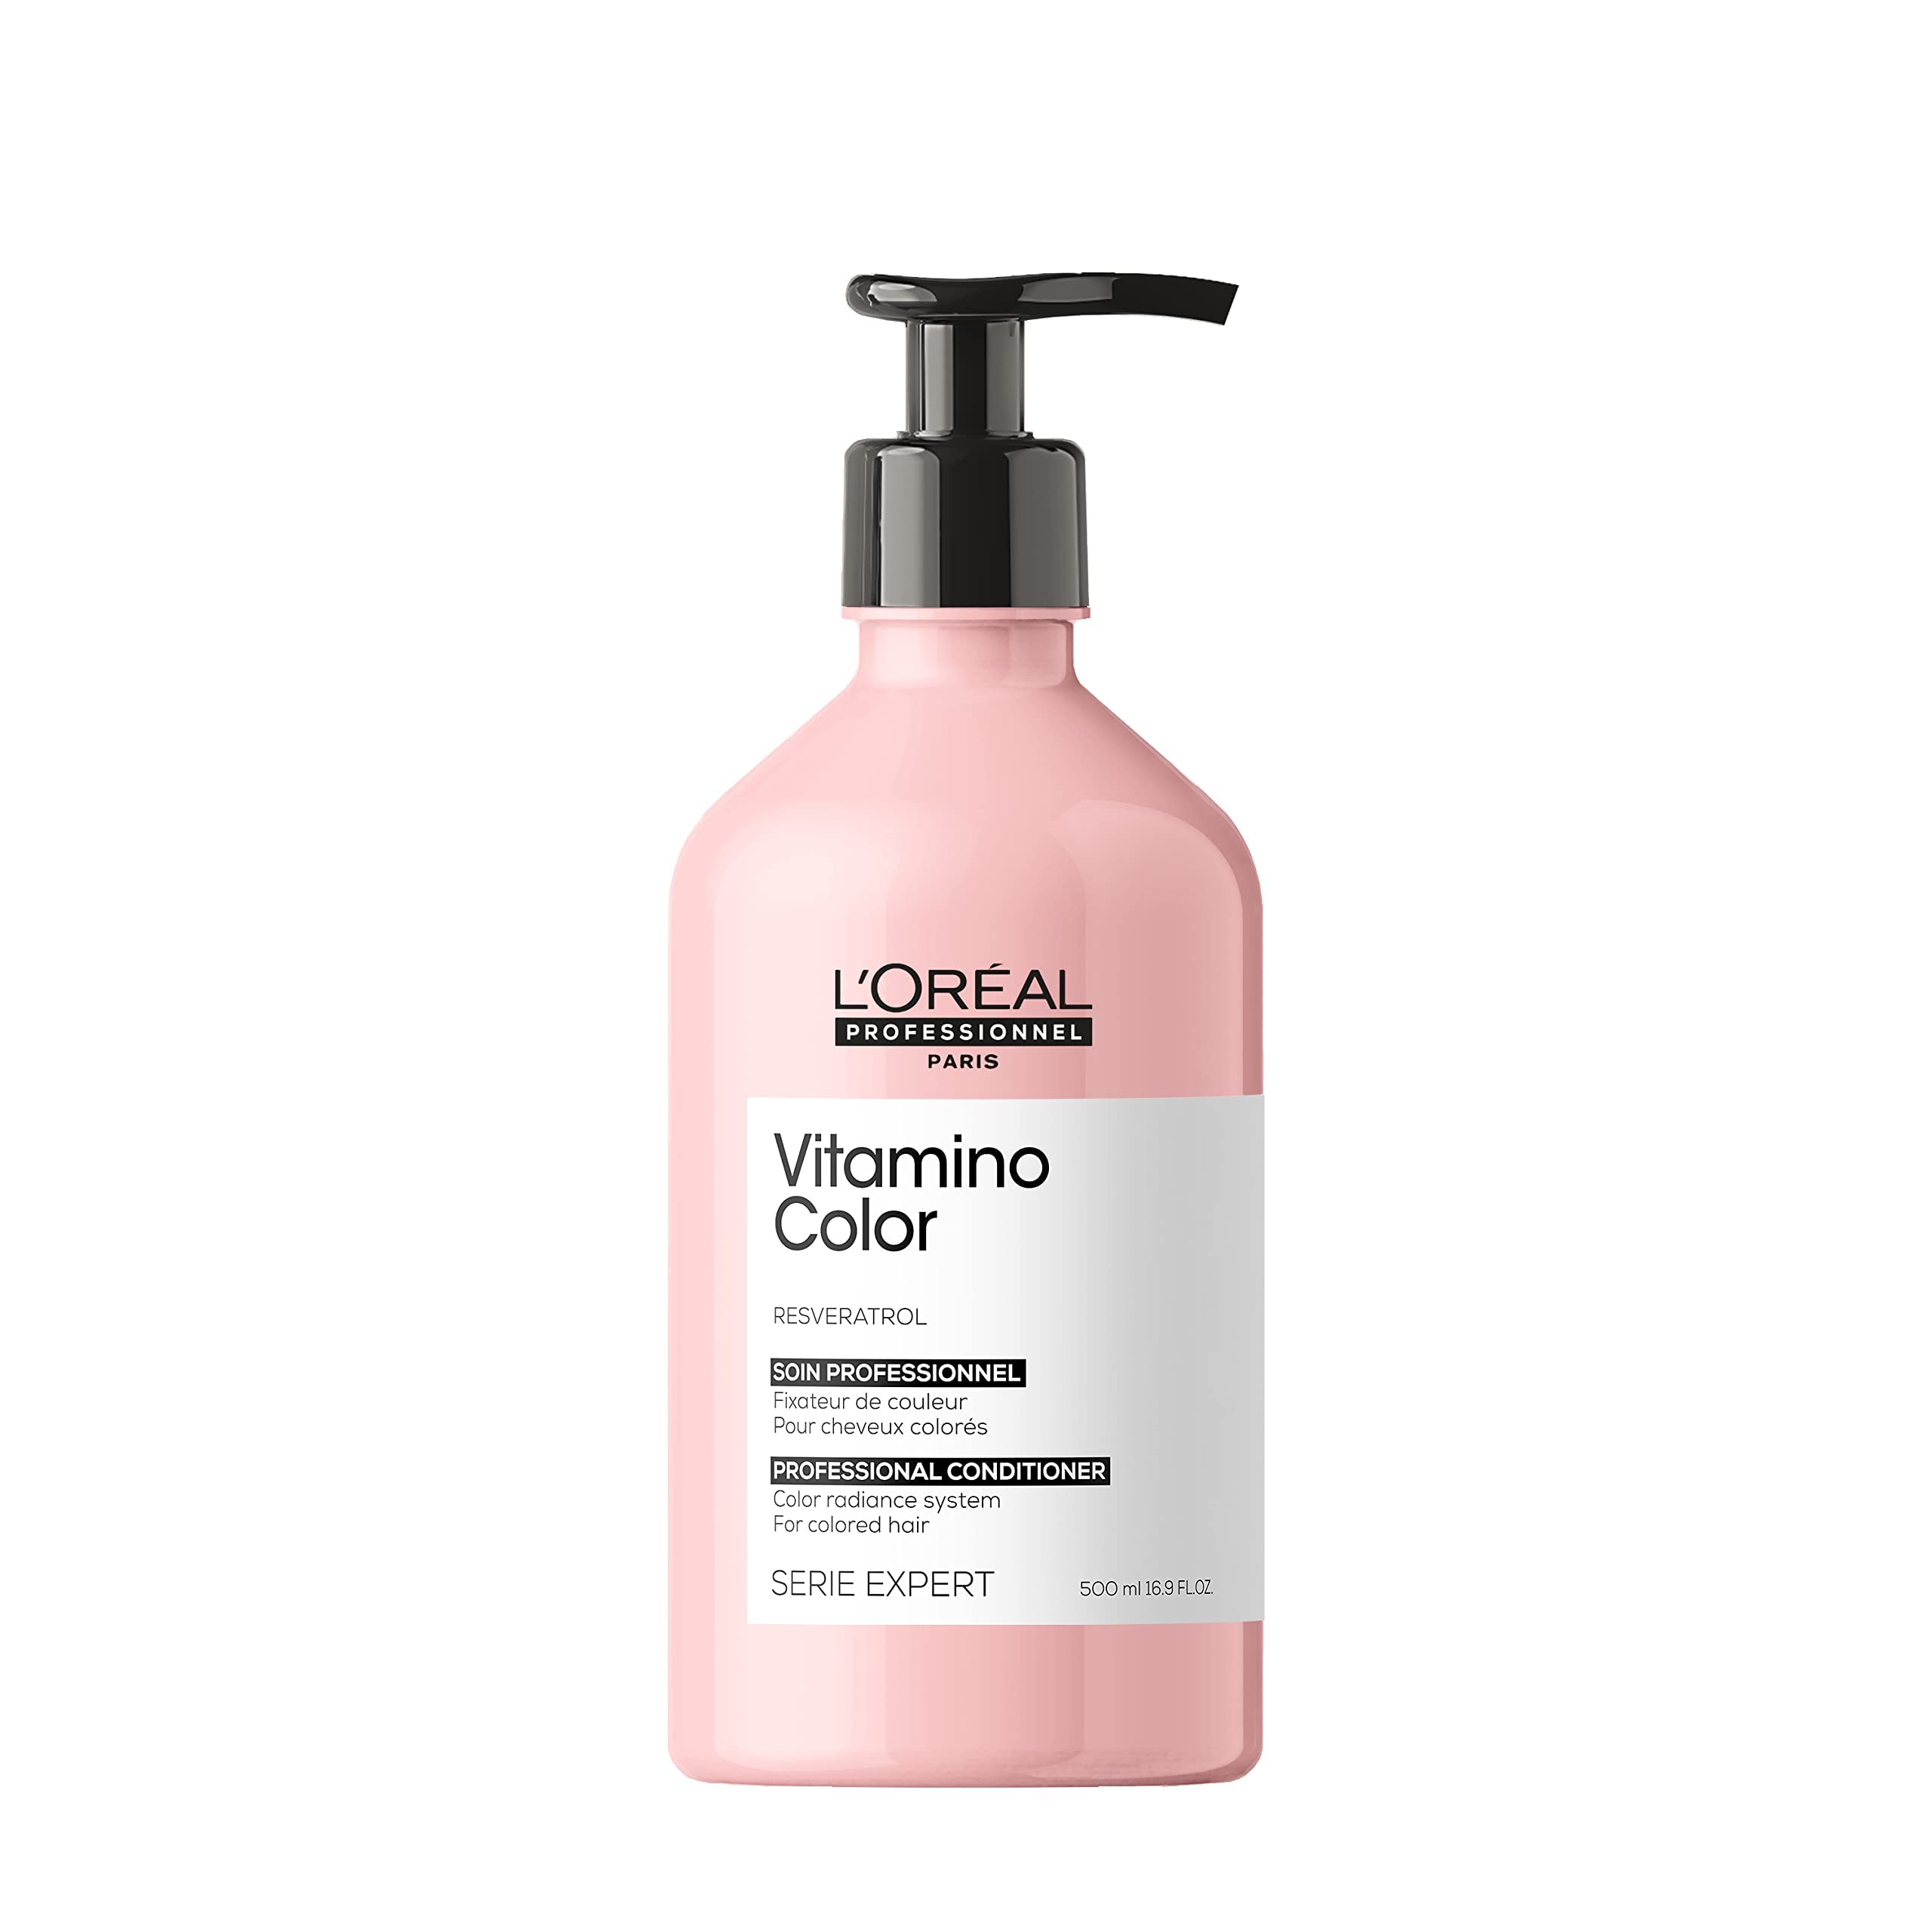 L'Oreal Professionnel Vitamino Color Conditioner | Protects & Preserves Hair Color | Enhances Shine & Vibrancy | Moisturizes & Detangles | For Color Treated Hair | 16.9 Fl. Oz.